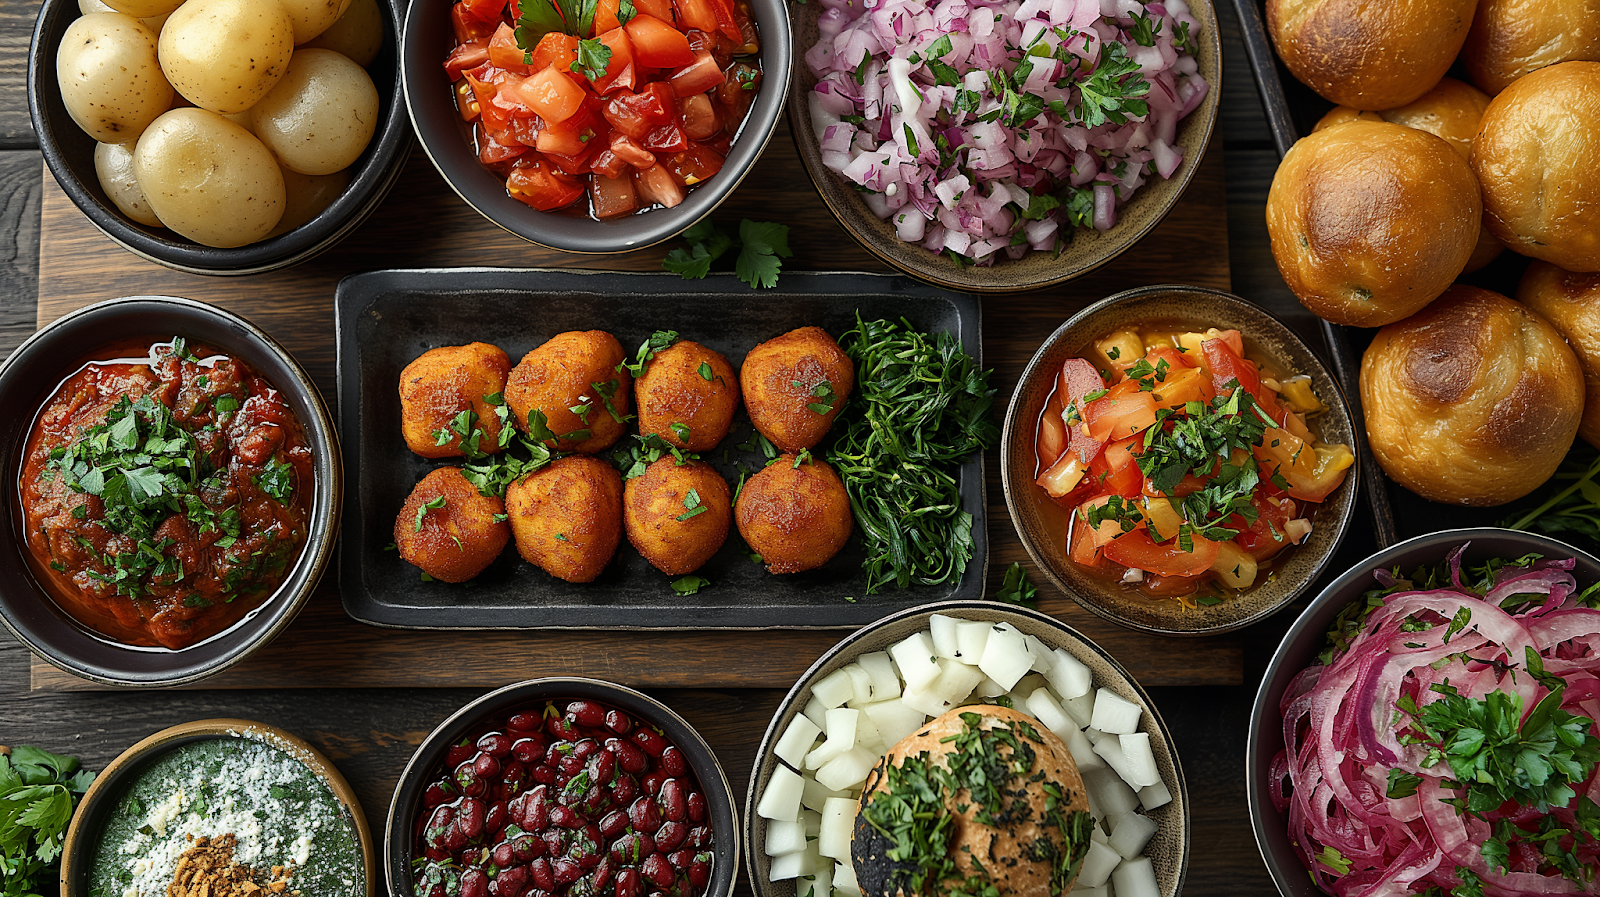 Exquisitely plated traditional Israeli cuisine, highlighting the culinary fusion of Tel Aviv with vibrant ingredients and flavors, ready to be enjoyed.